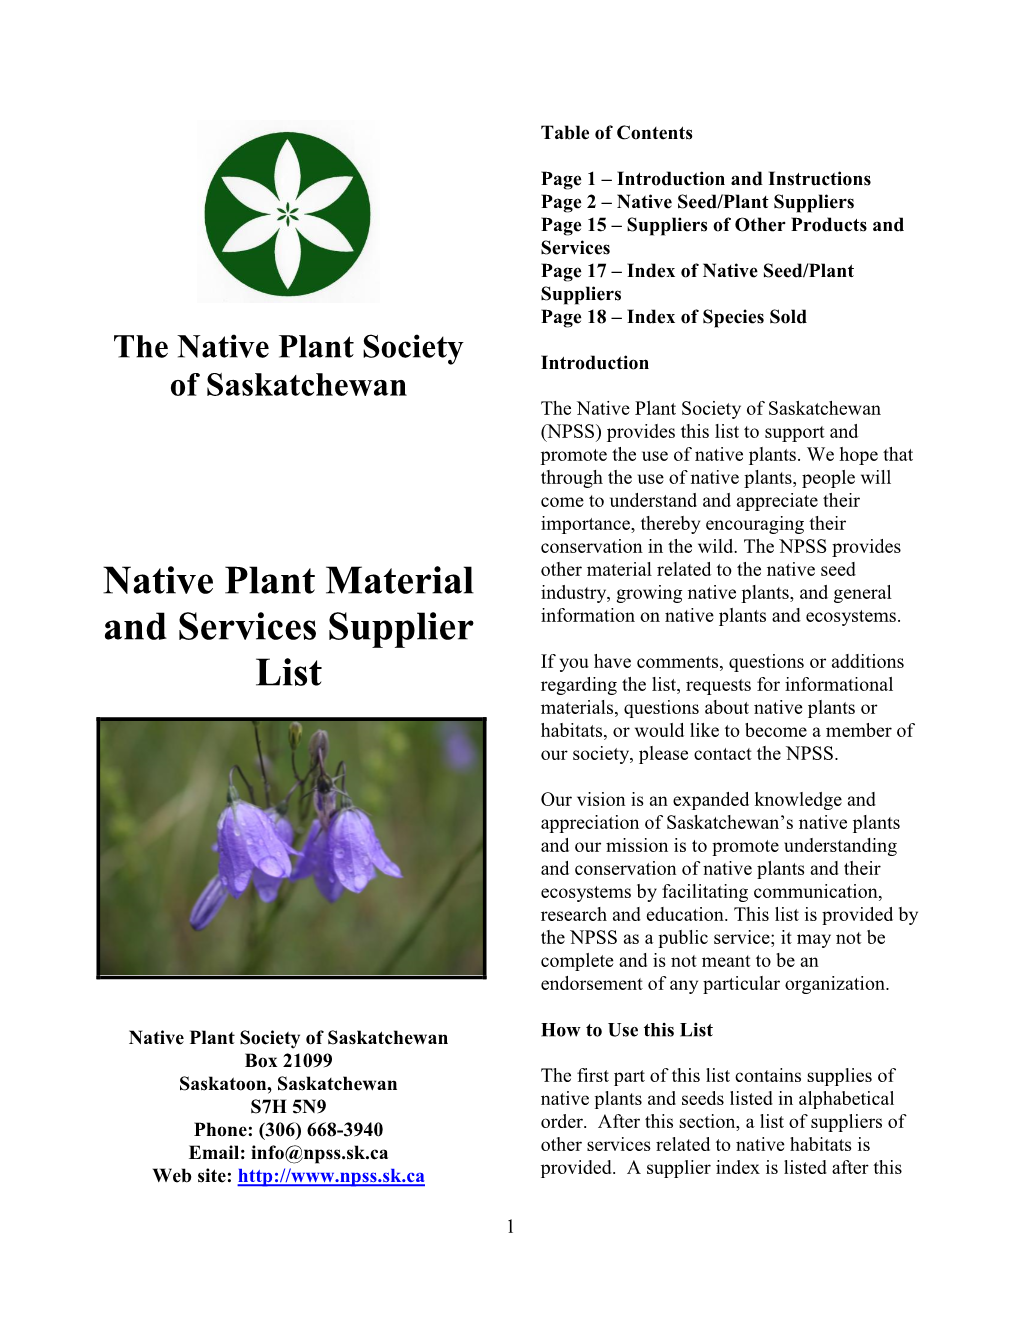 Native Plant Material and Services Supplier List